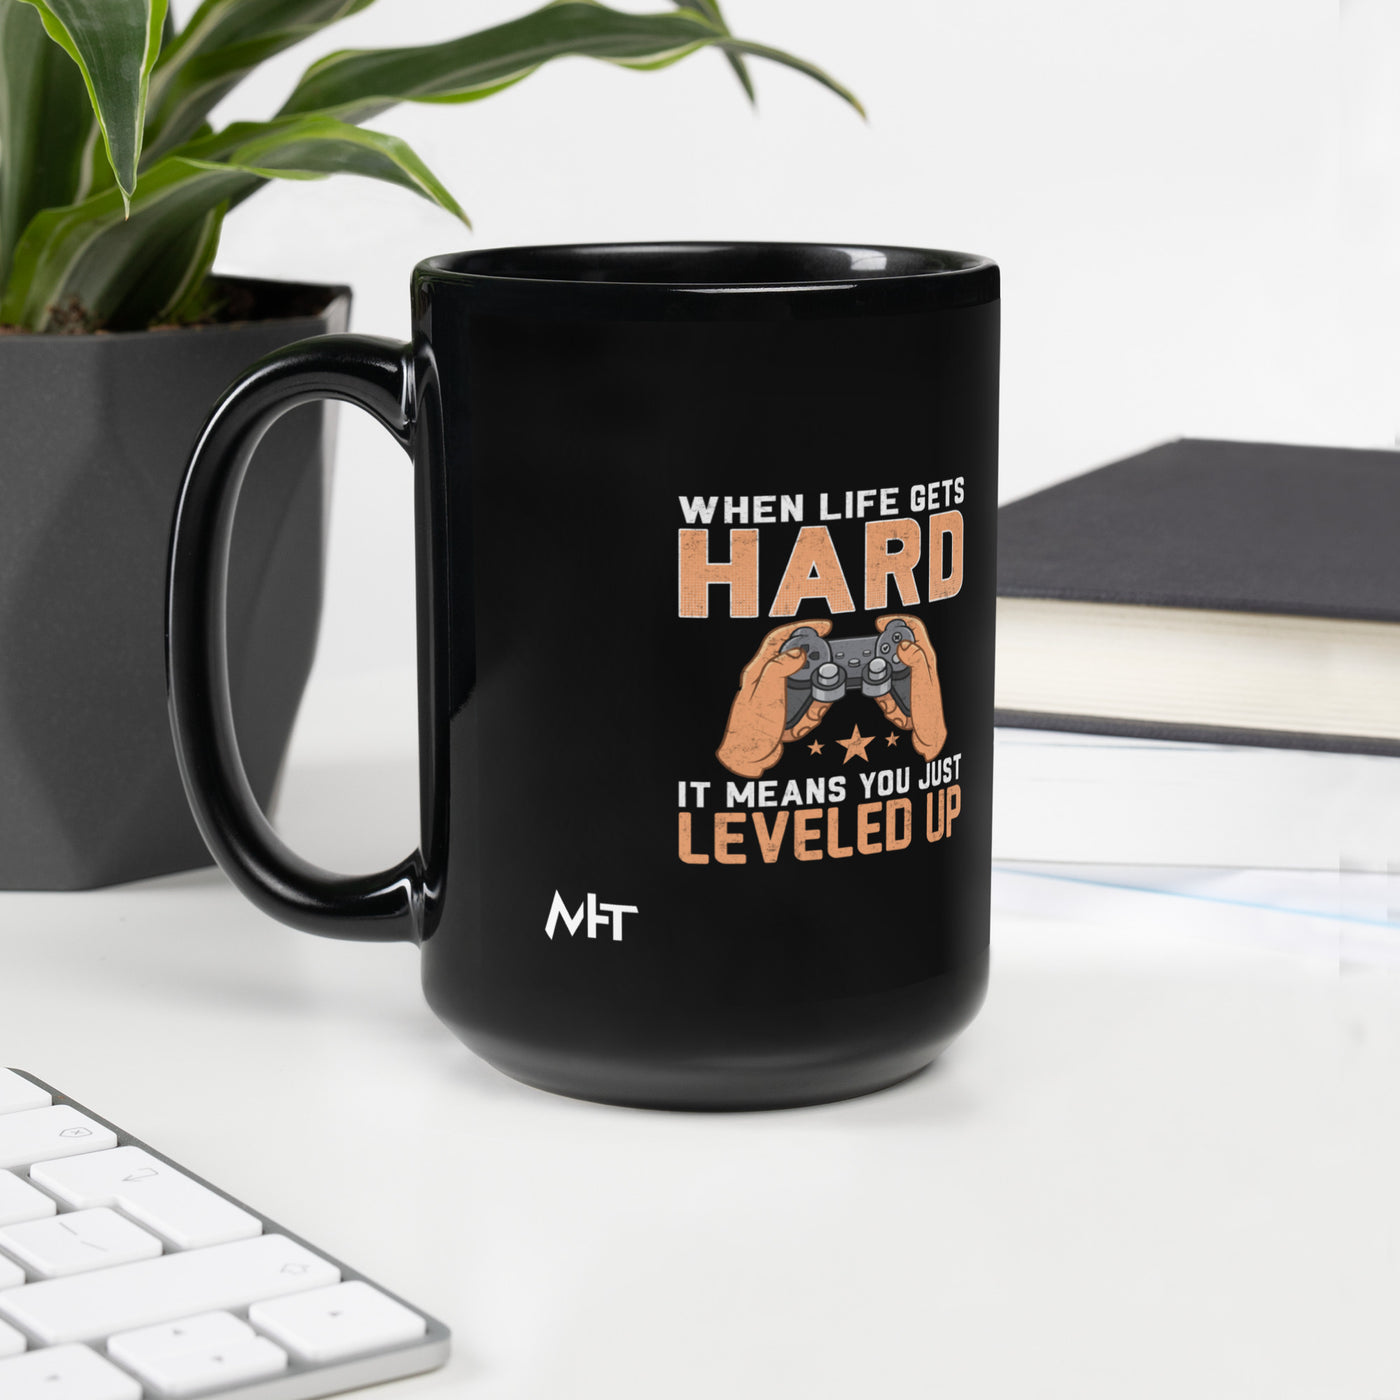 When life Gets hard, it Means you are leveled up - Black Glossy Mug